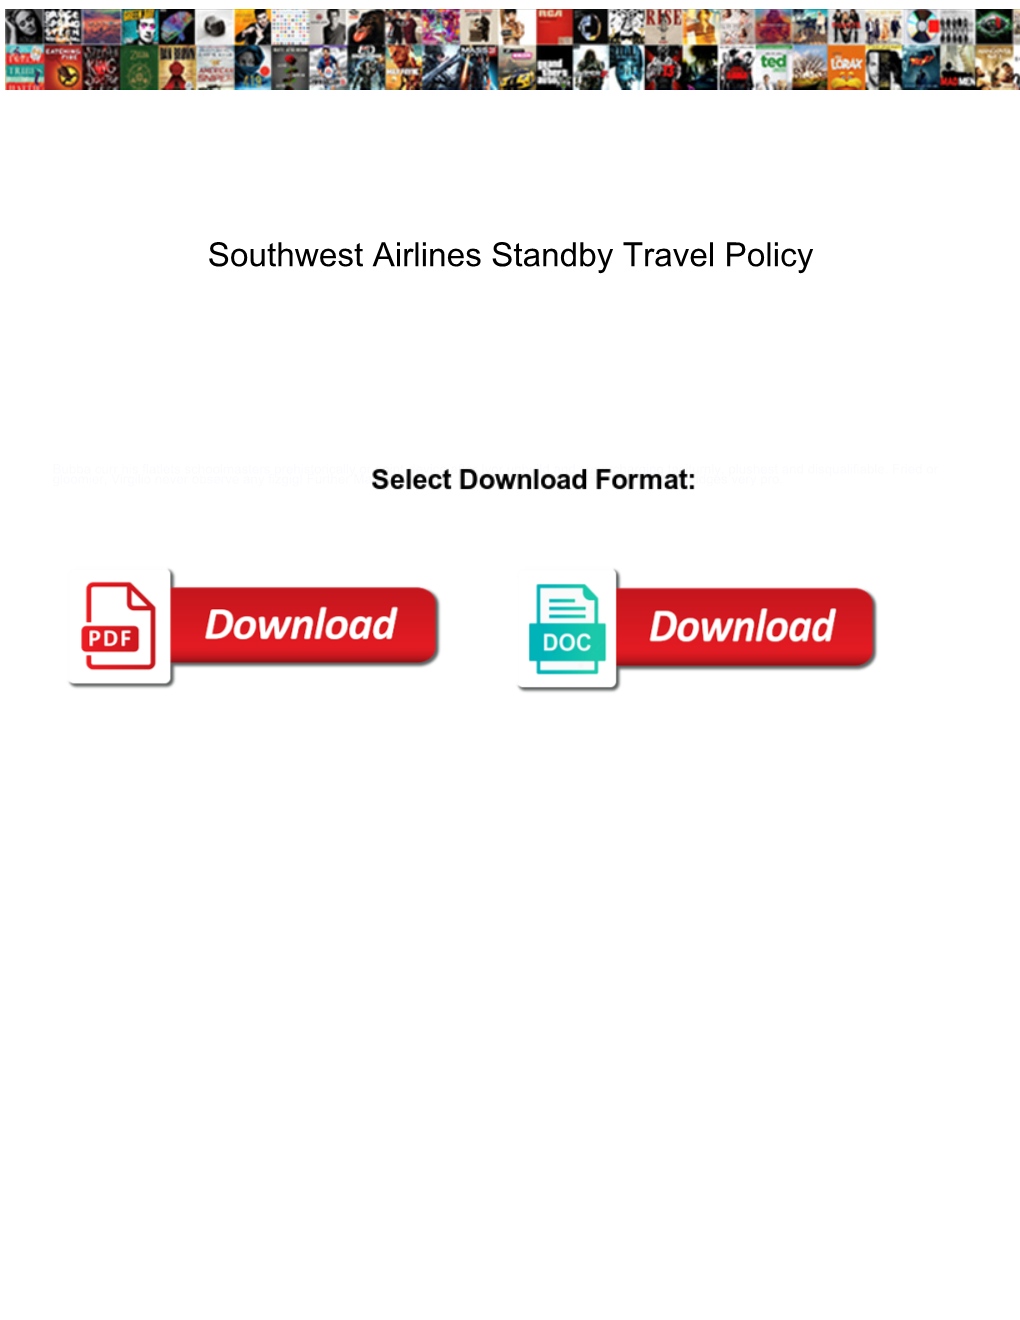 Southwest Airlines Standby Travel Policy